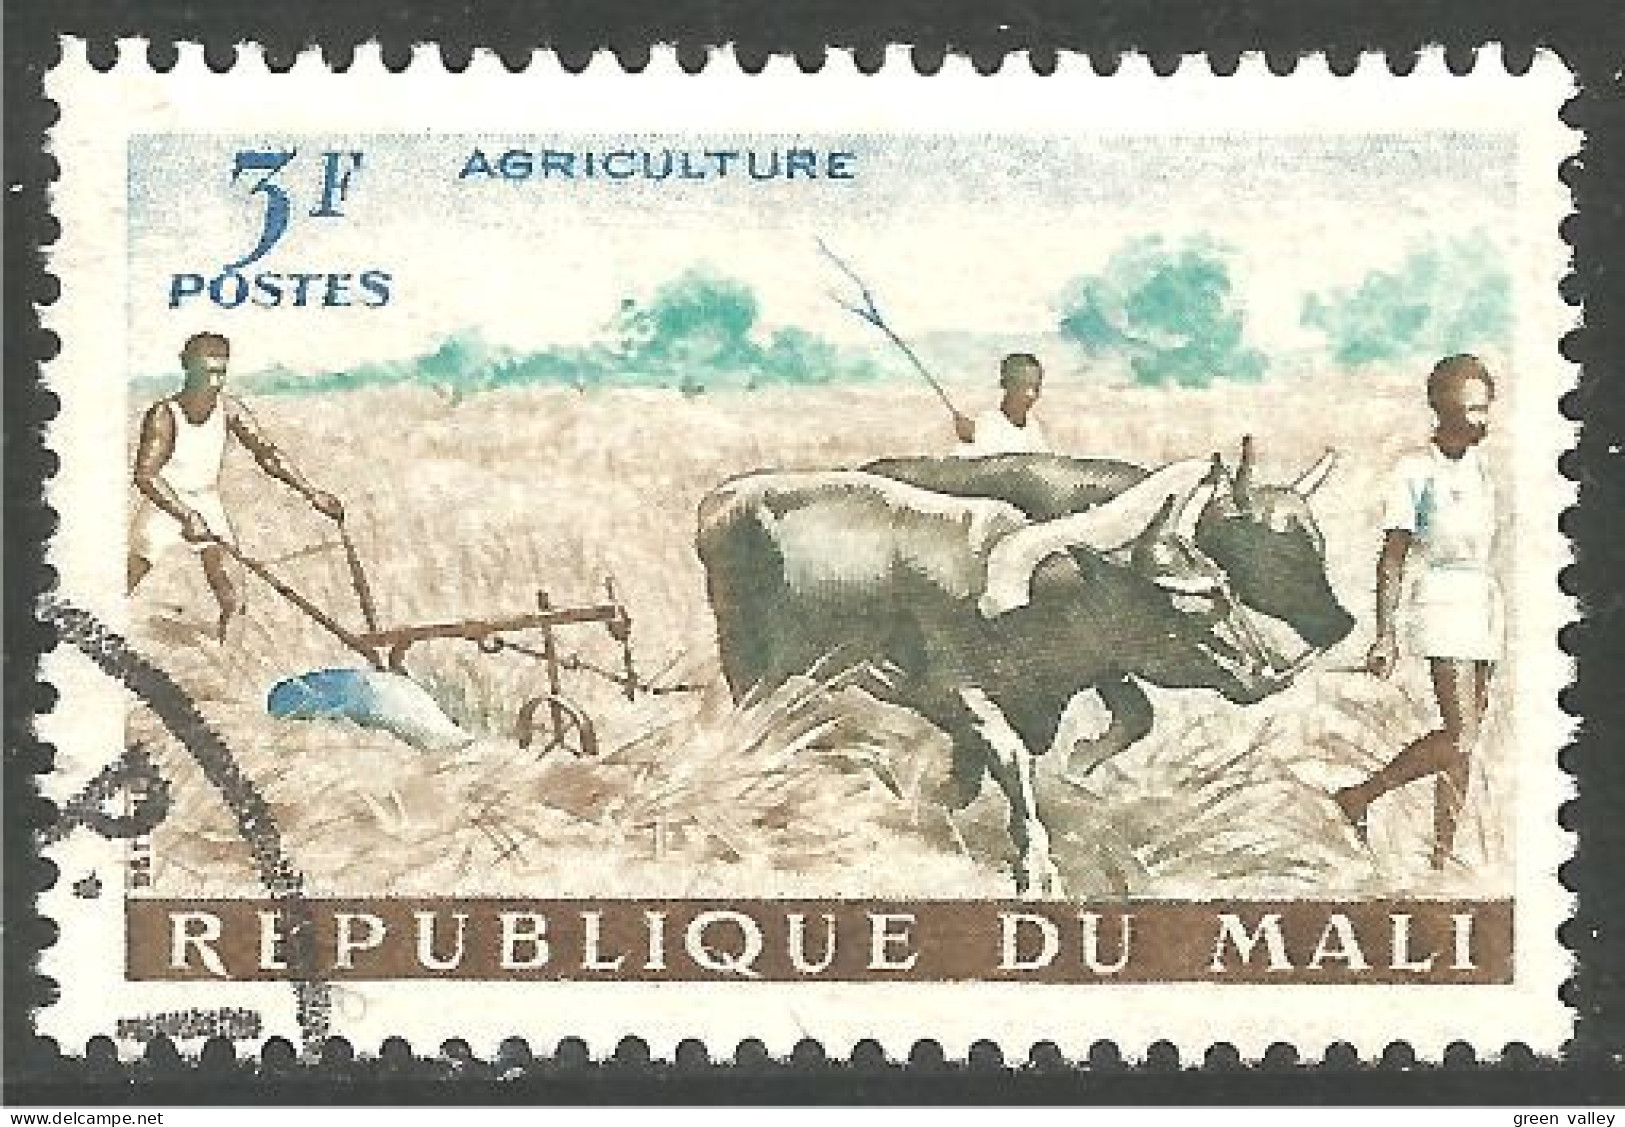 AF-61 Mali Agriculture Boeuf Ox Labour Plowing - Agricultura